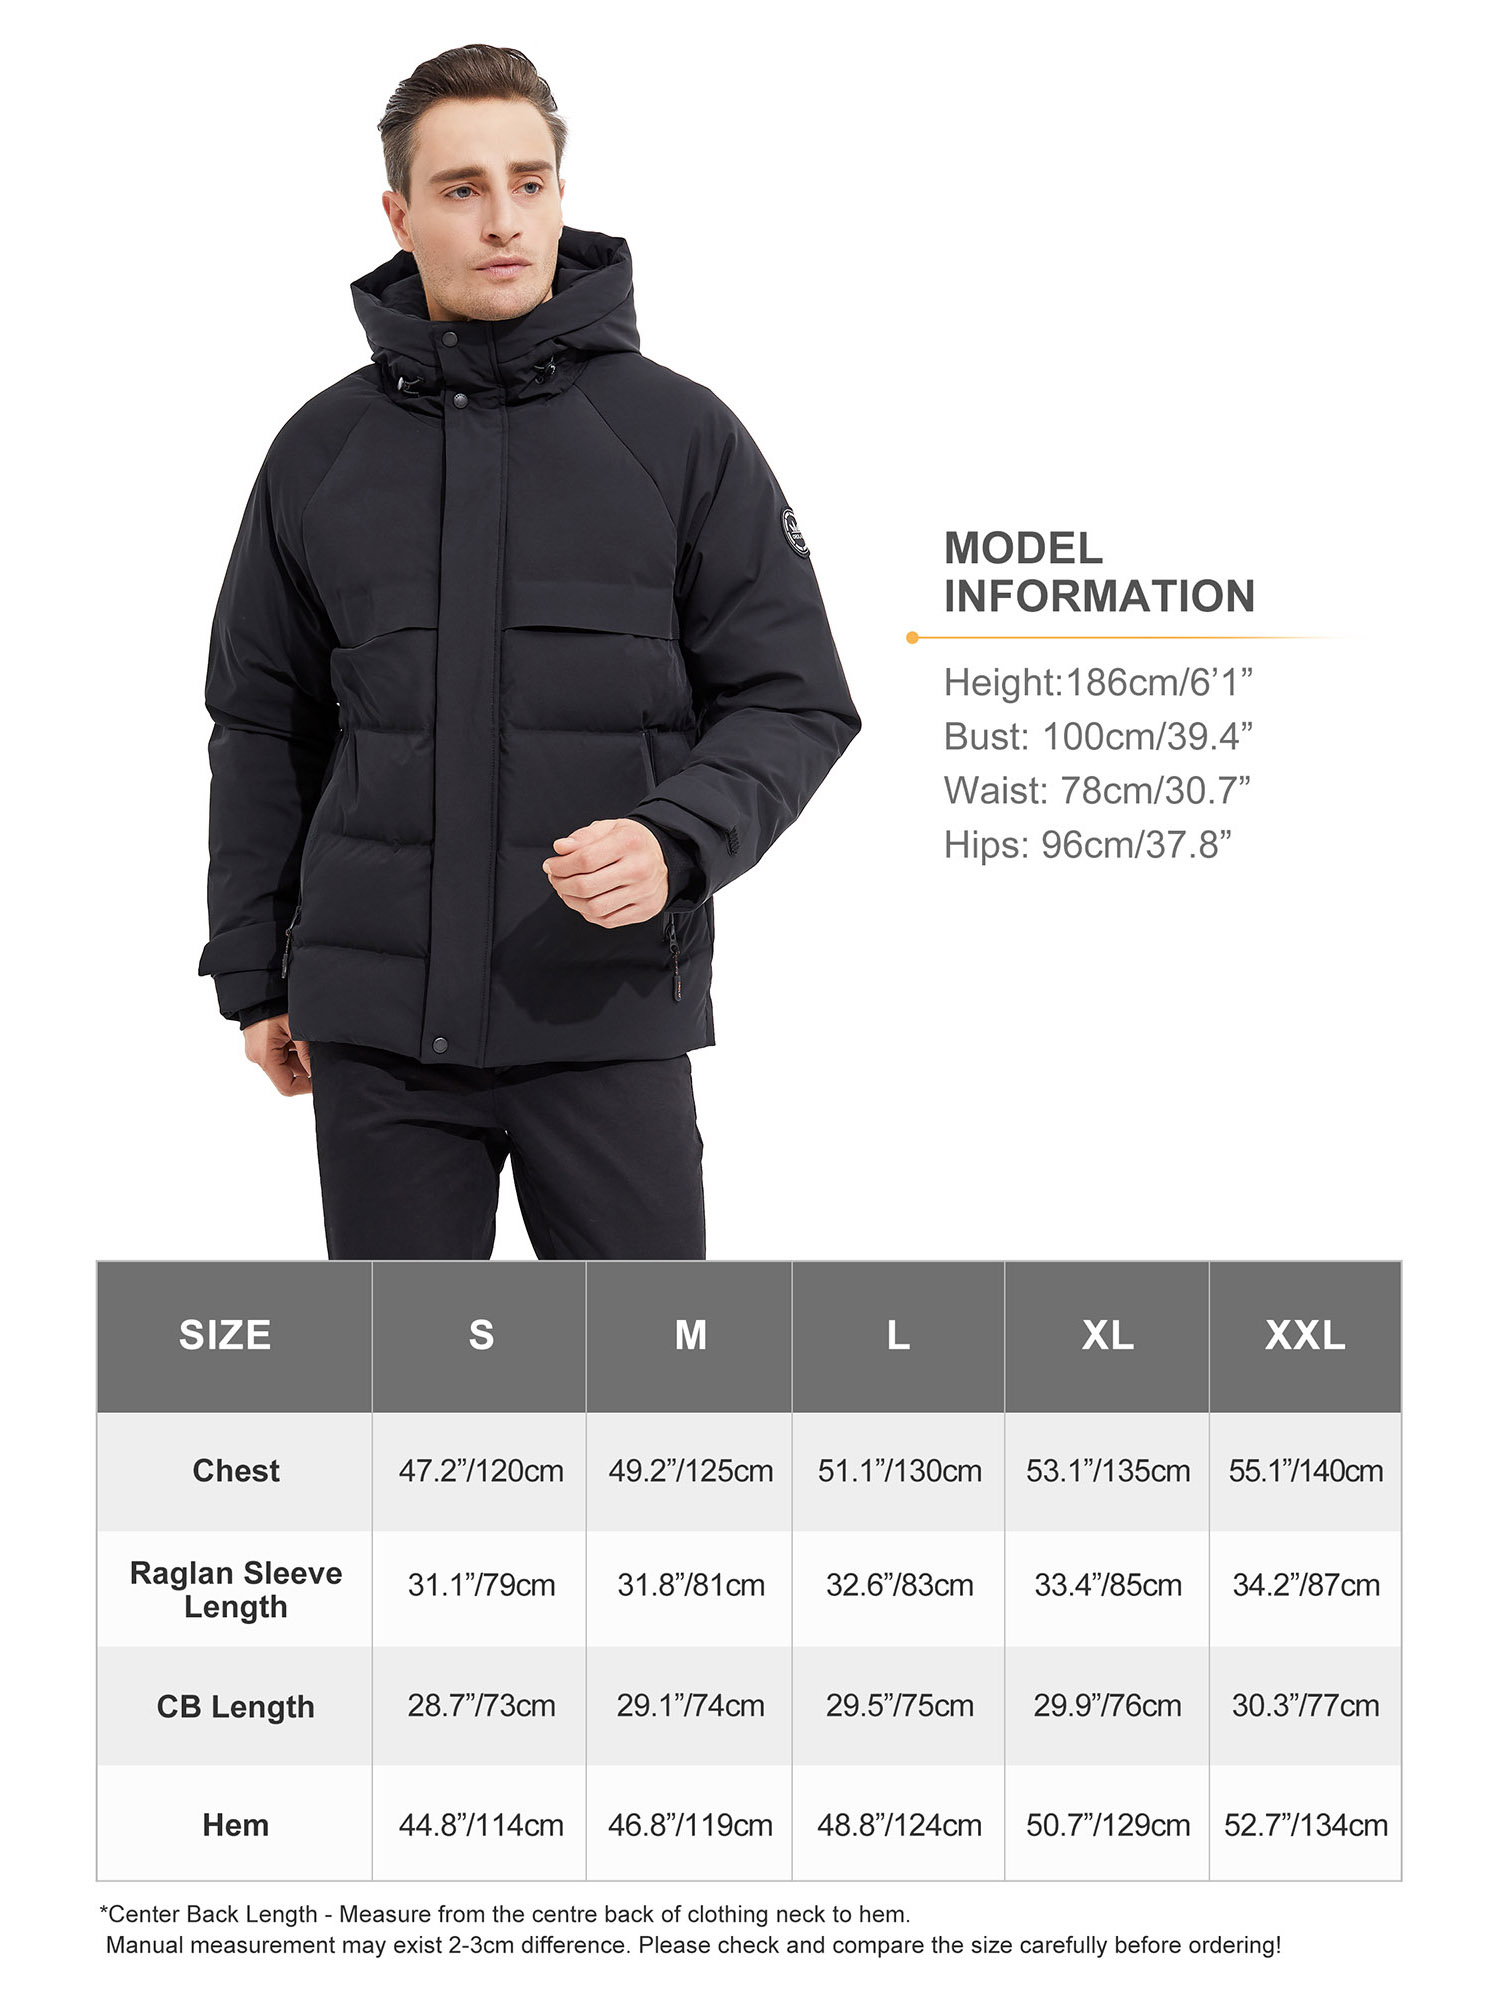 Orolay Men's Winter Down Jacket with Adjustable Drawstring Hood Ribbed Cuff - image 5 of 5